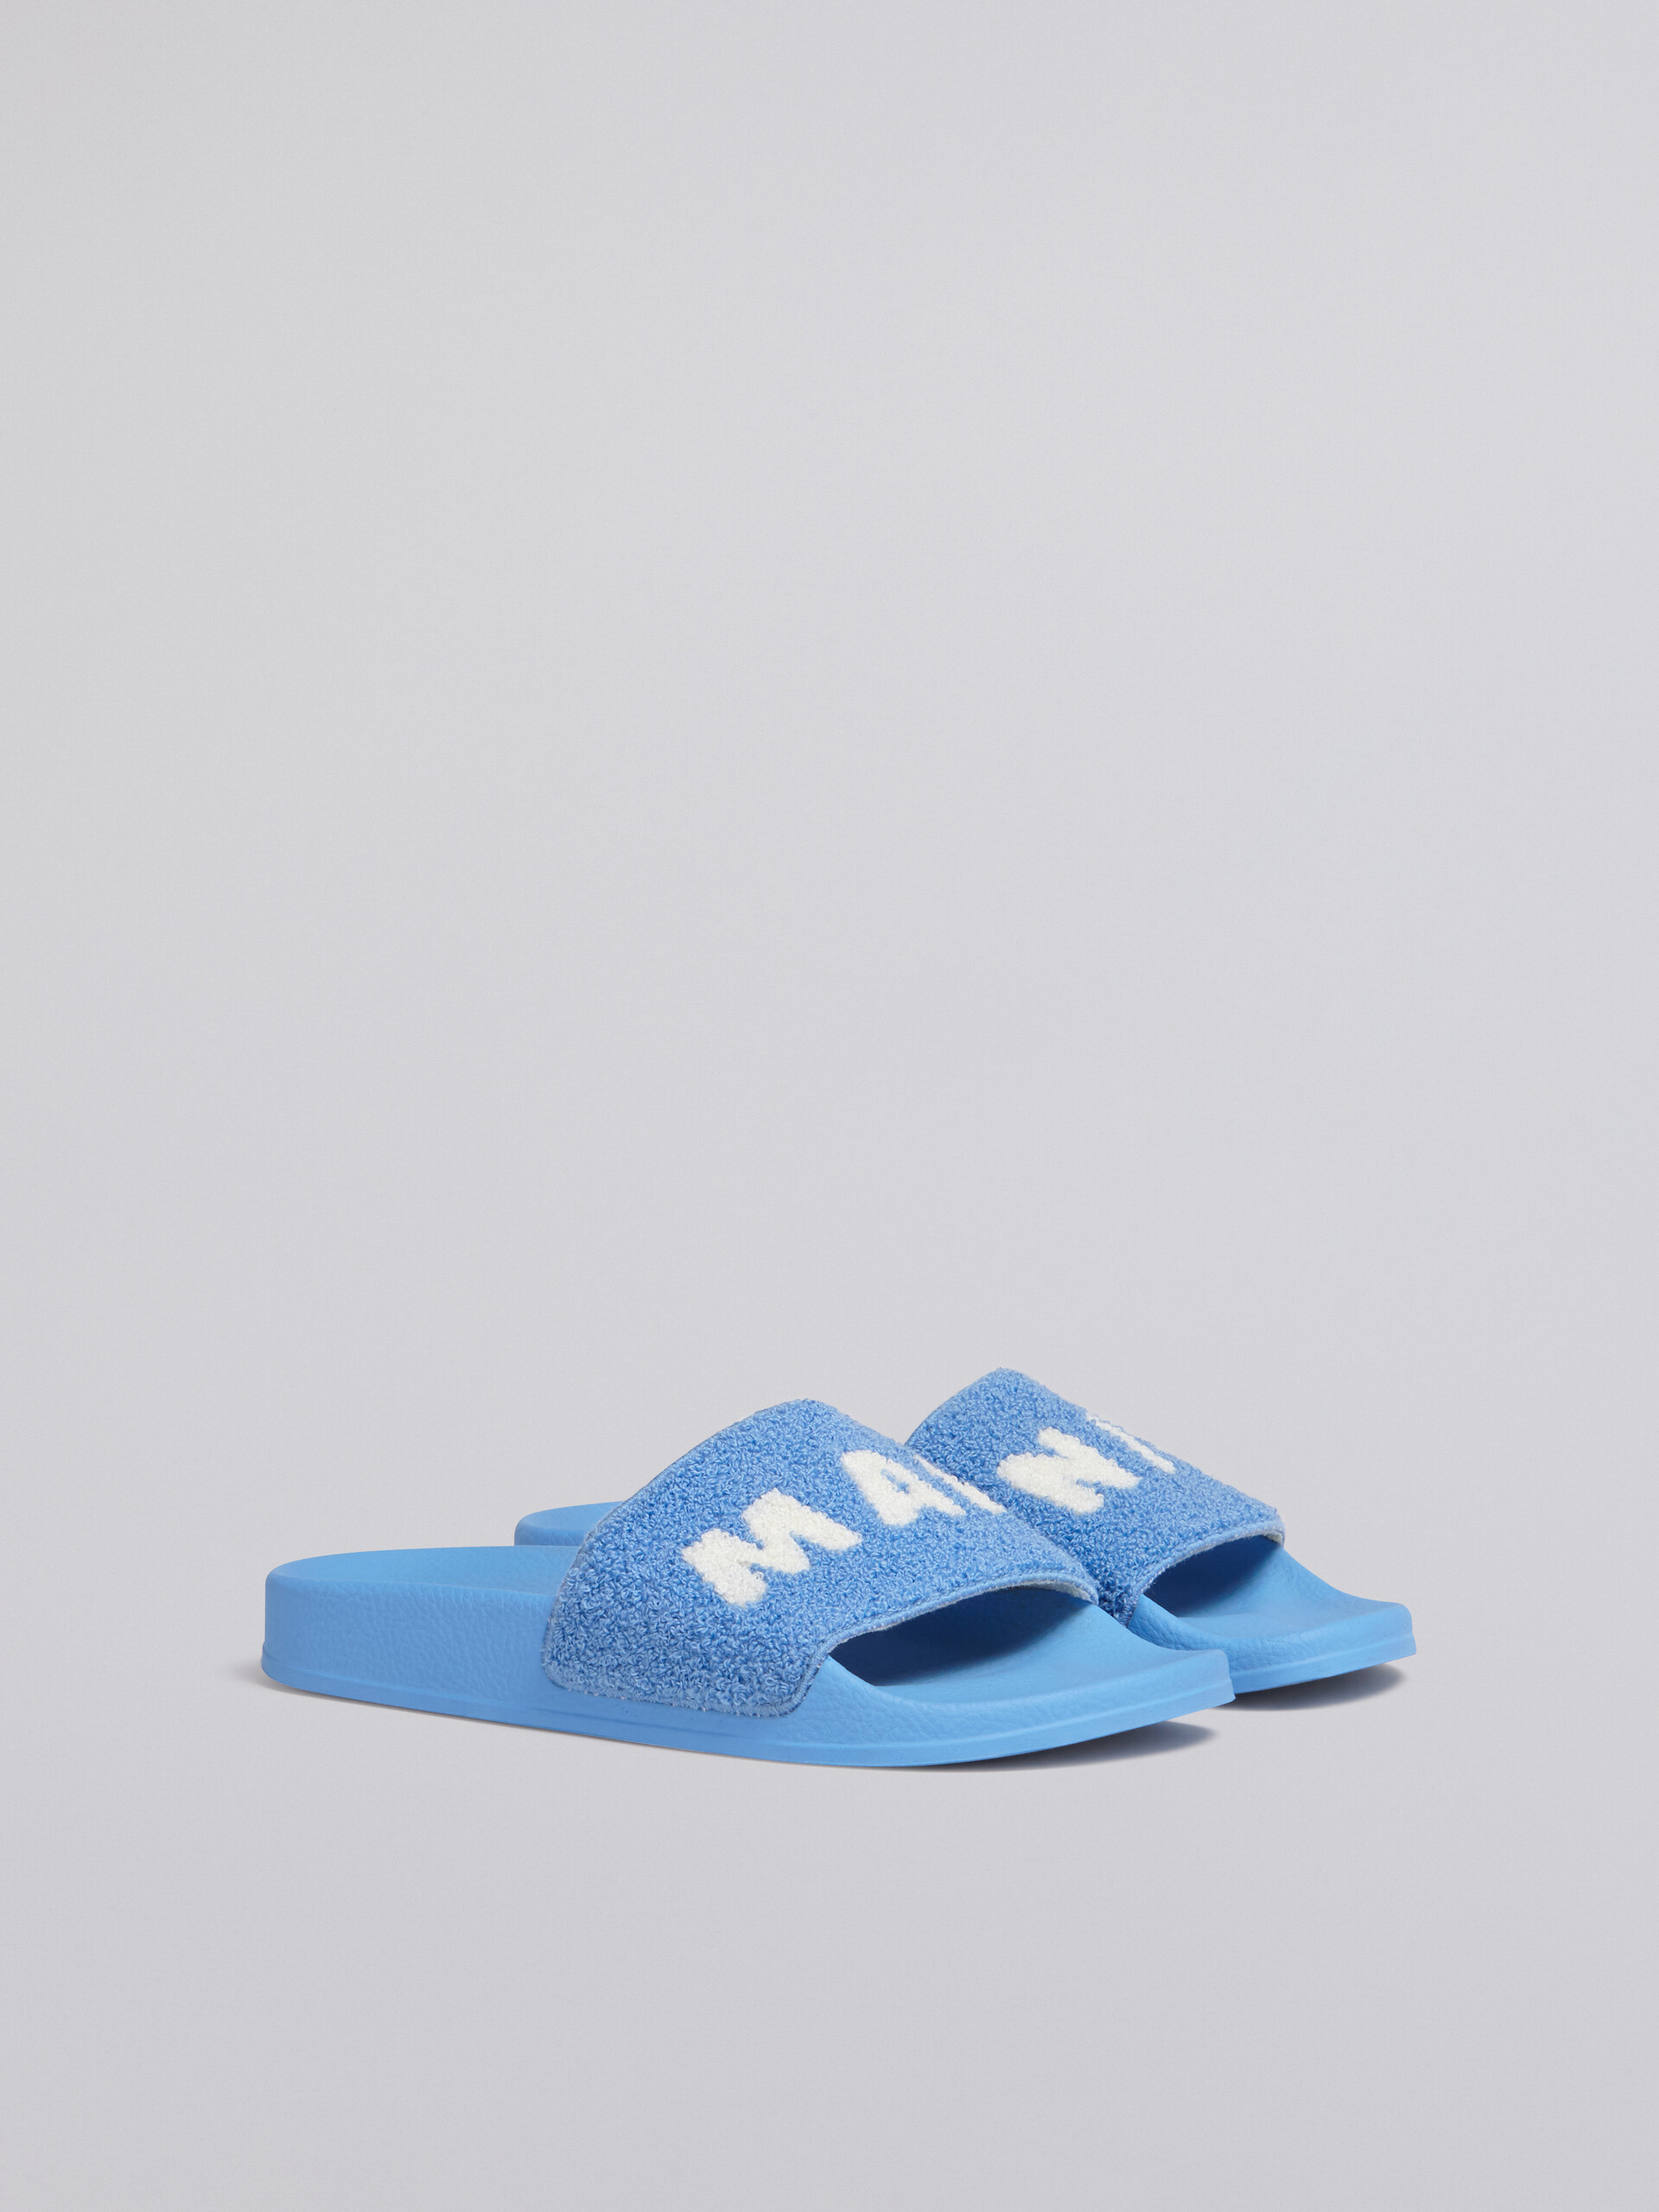 Rubber sandal with blue and white terry cloth upper - Sandals - Image 2